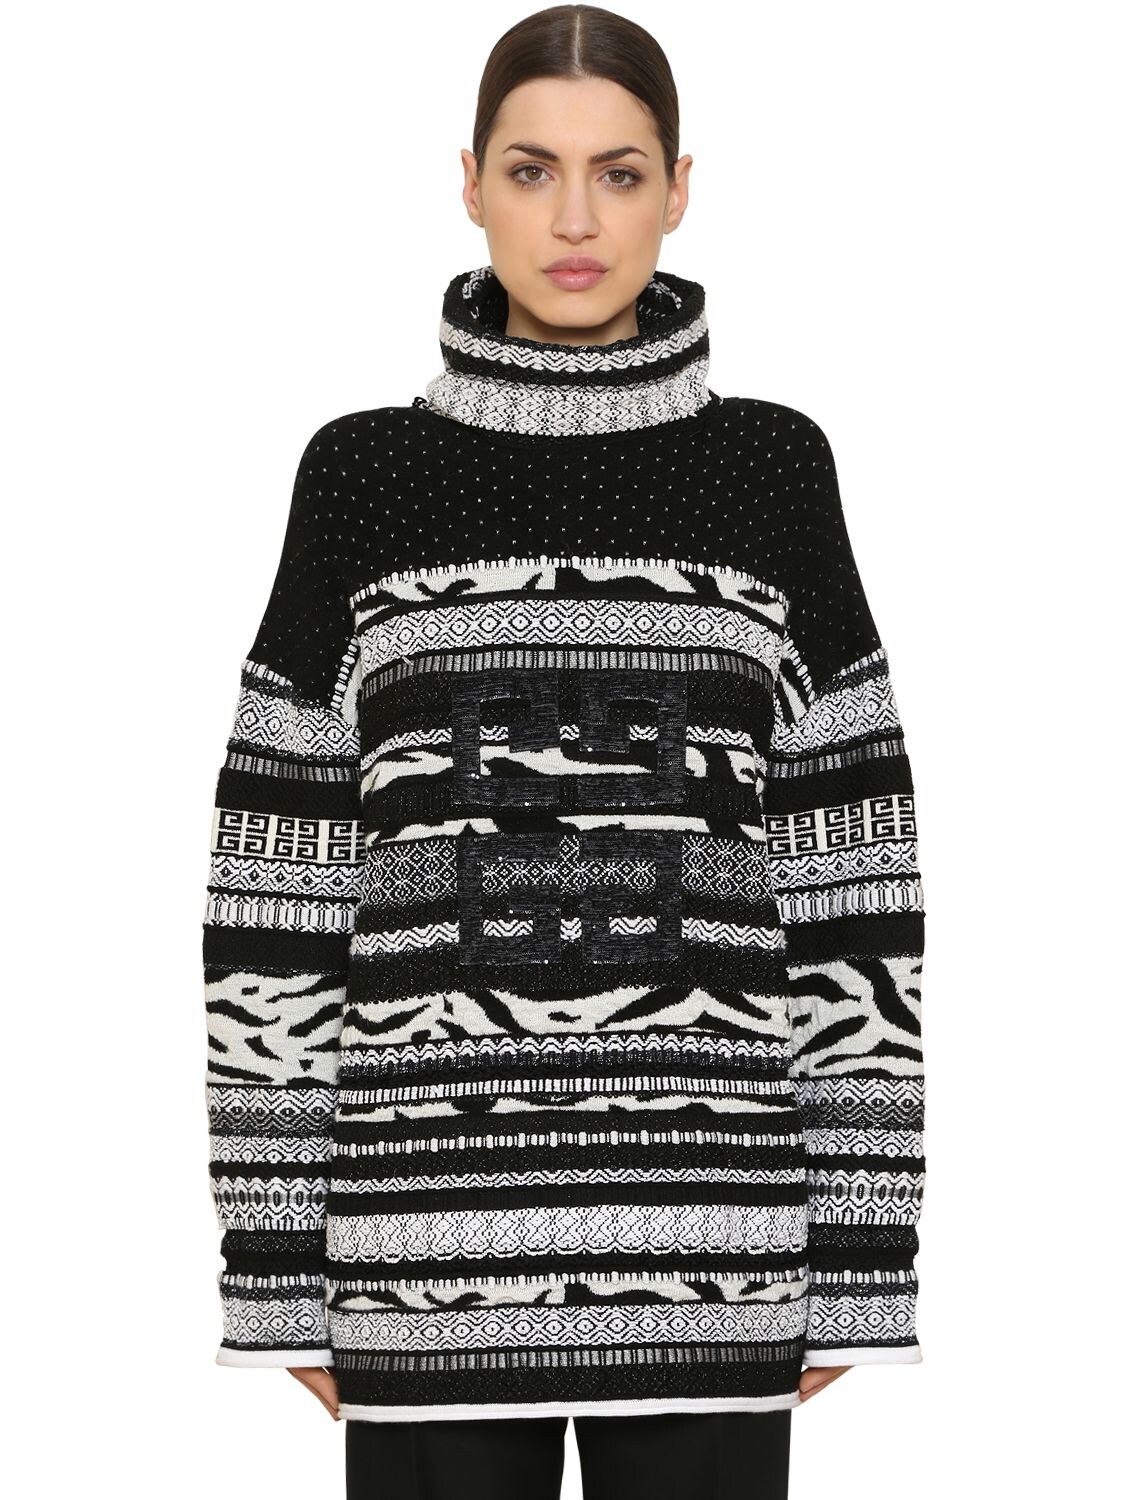 GIVENCHY SEQUINED WOOL JACQUARD KNIT jumper,68ID19017-MTE20